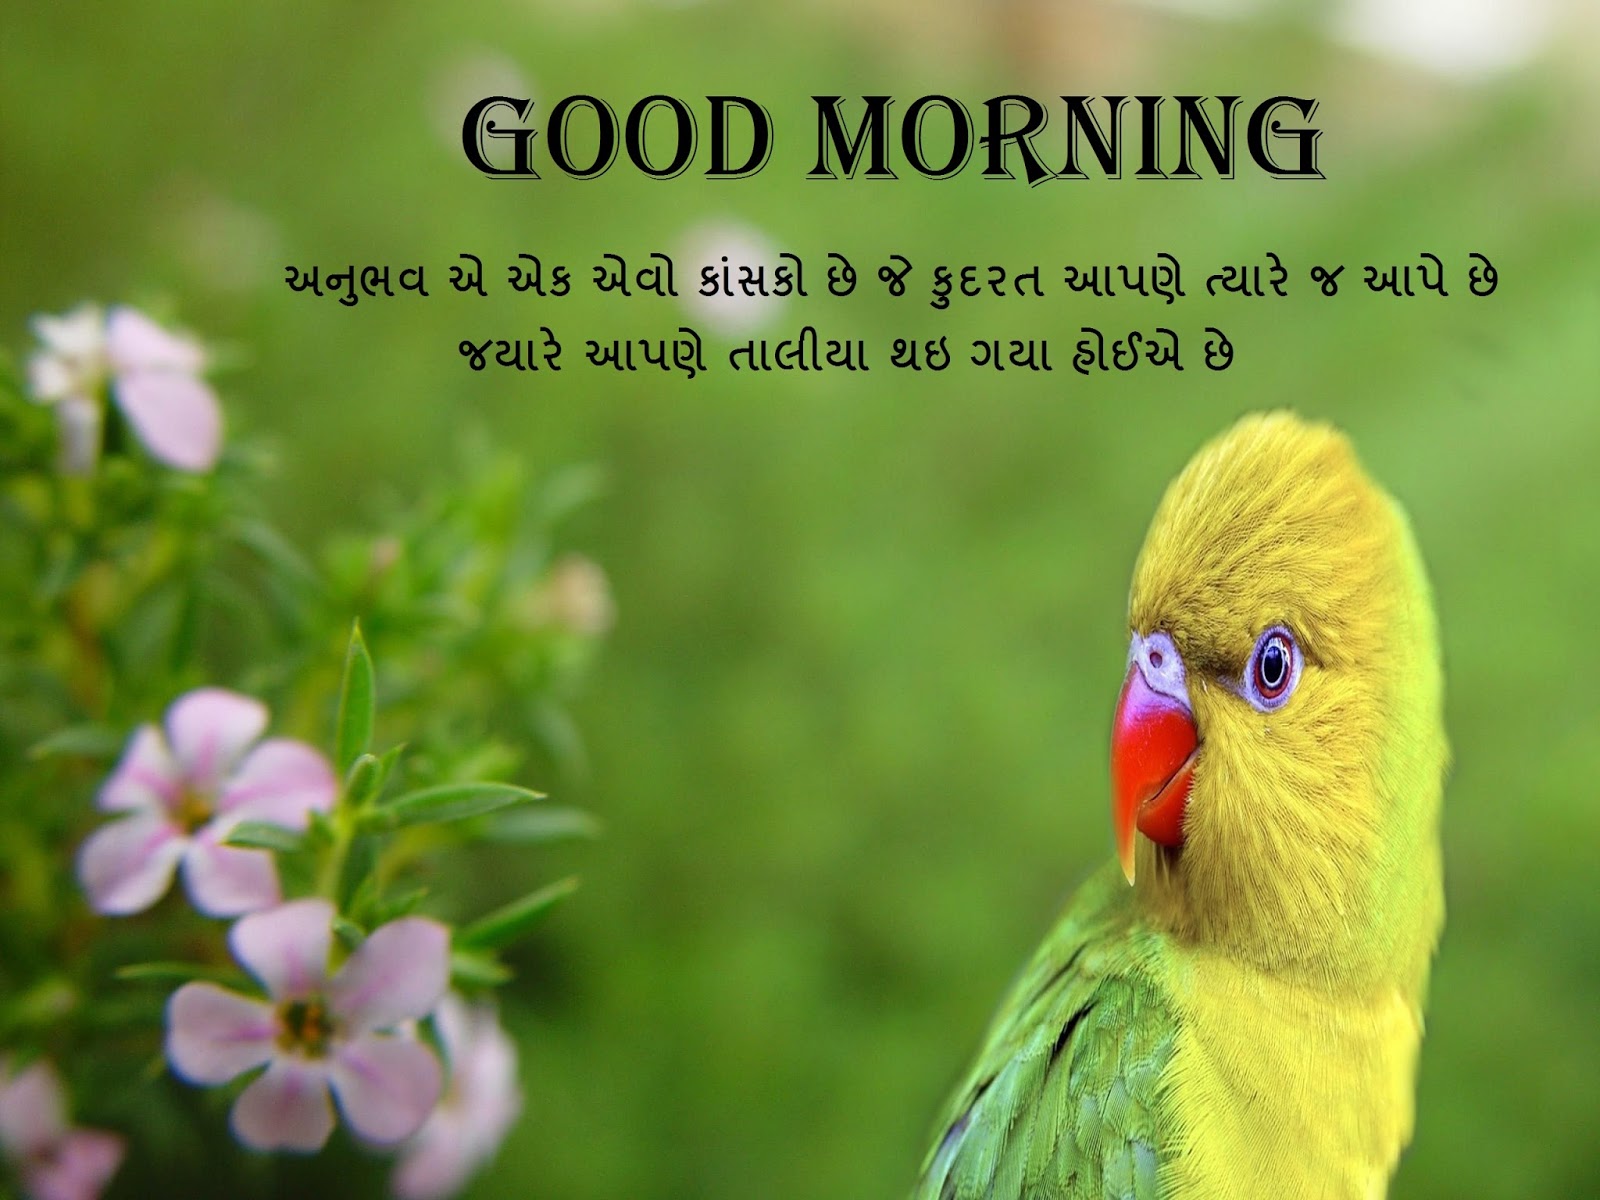 Good Morning Cards - Free Online Greeting Cards | Festival Chaska